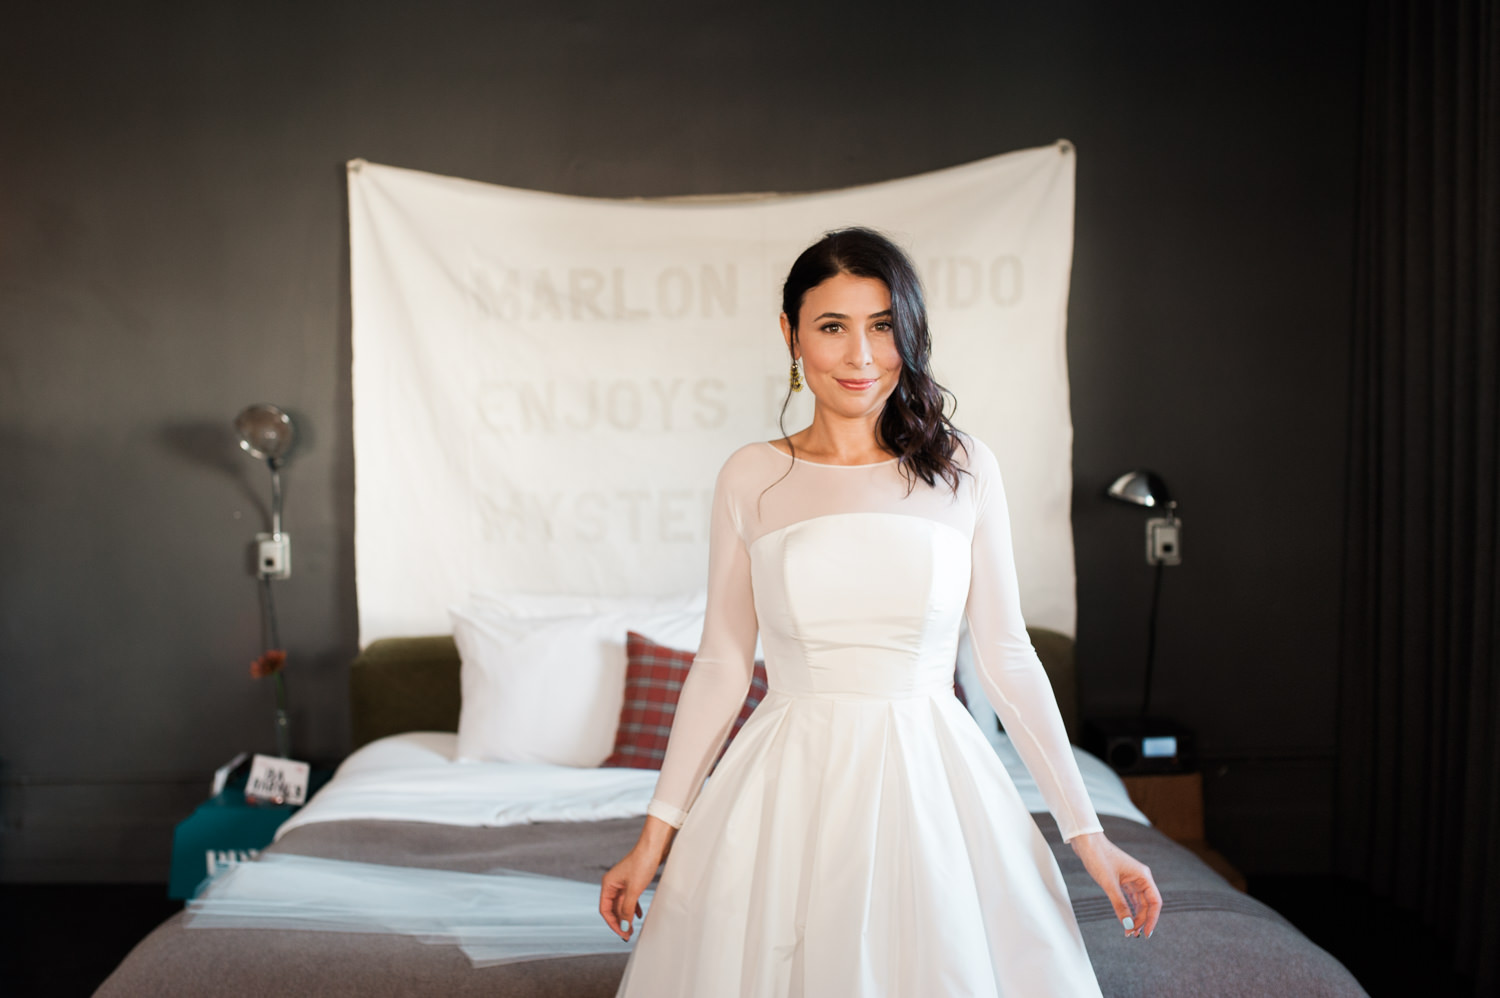 The beautiful bride in her mod wedding dress. by Ace Hotel wedding photographer Briana Morrison